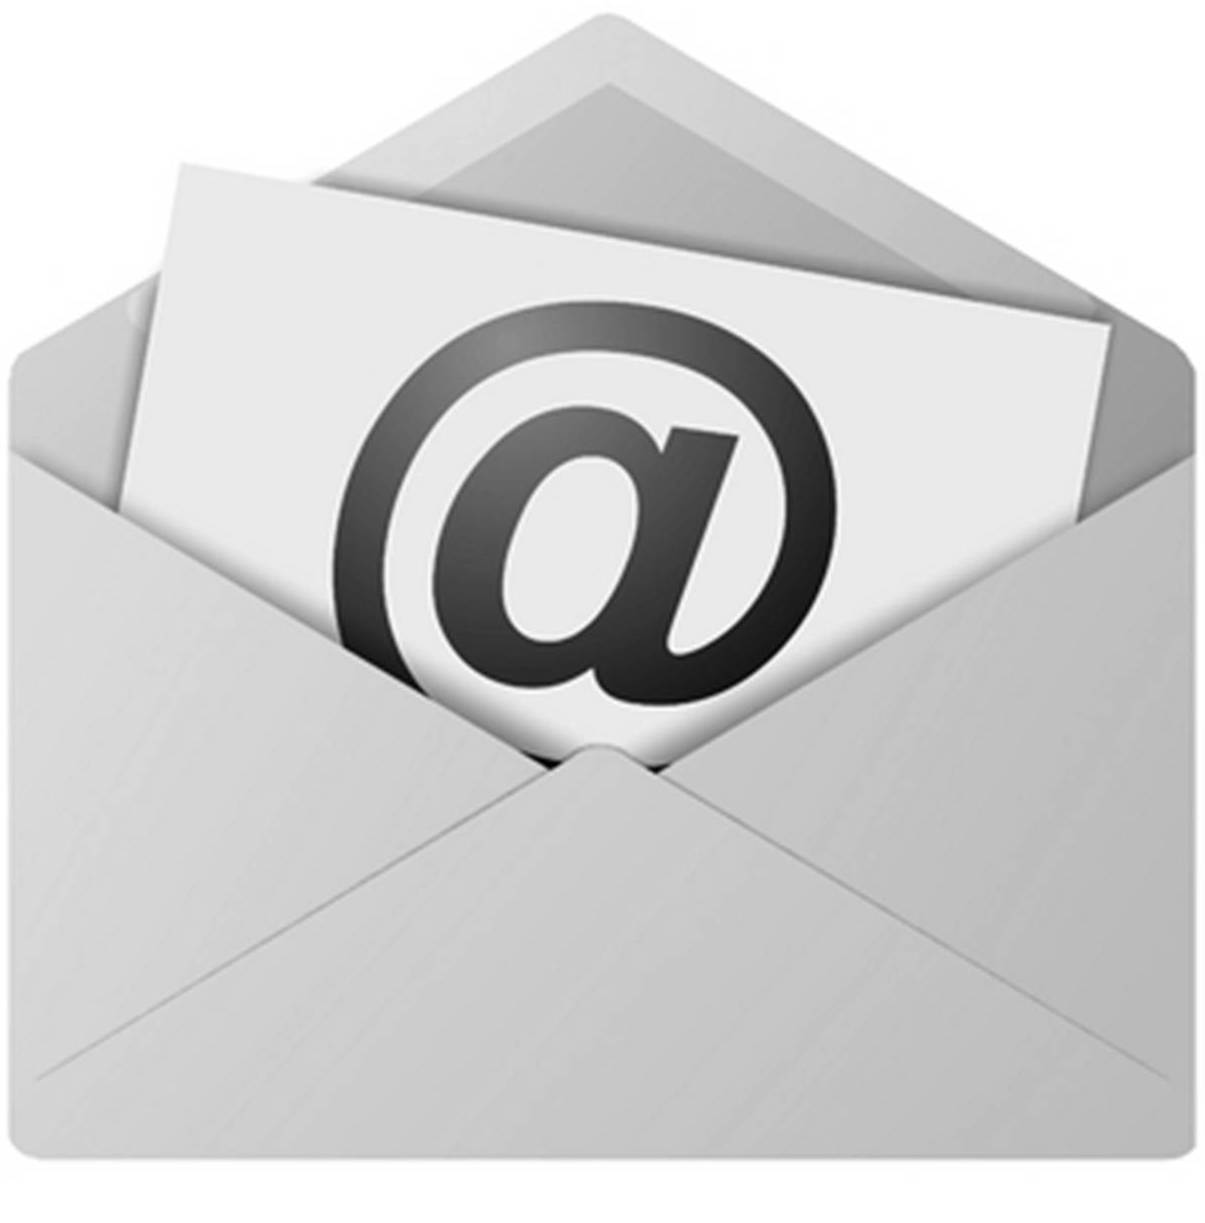 7 Tips On Email Campaigns. And A Bonus Link!